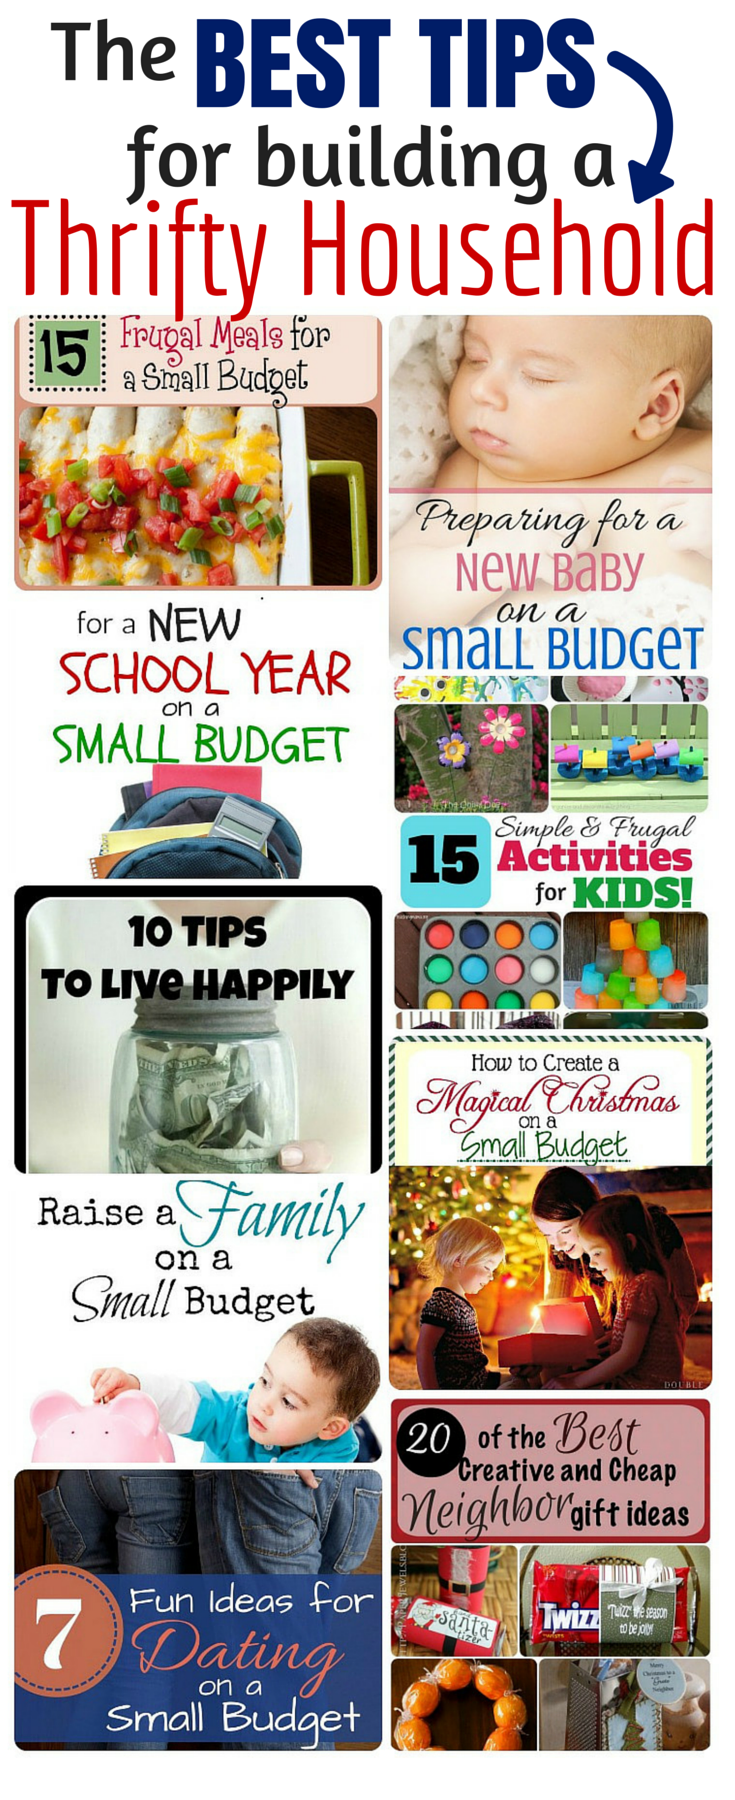 The best tips for building a thrifty household from several bloggers! Small budget? No problem!